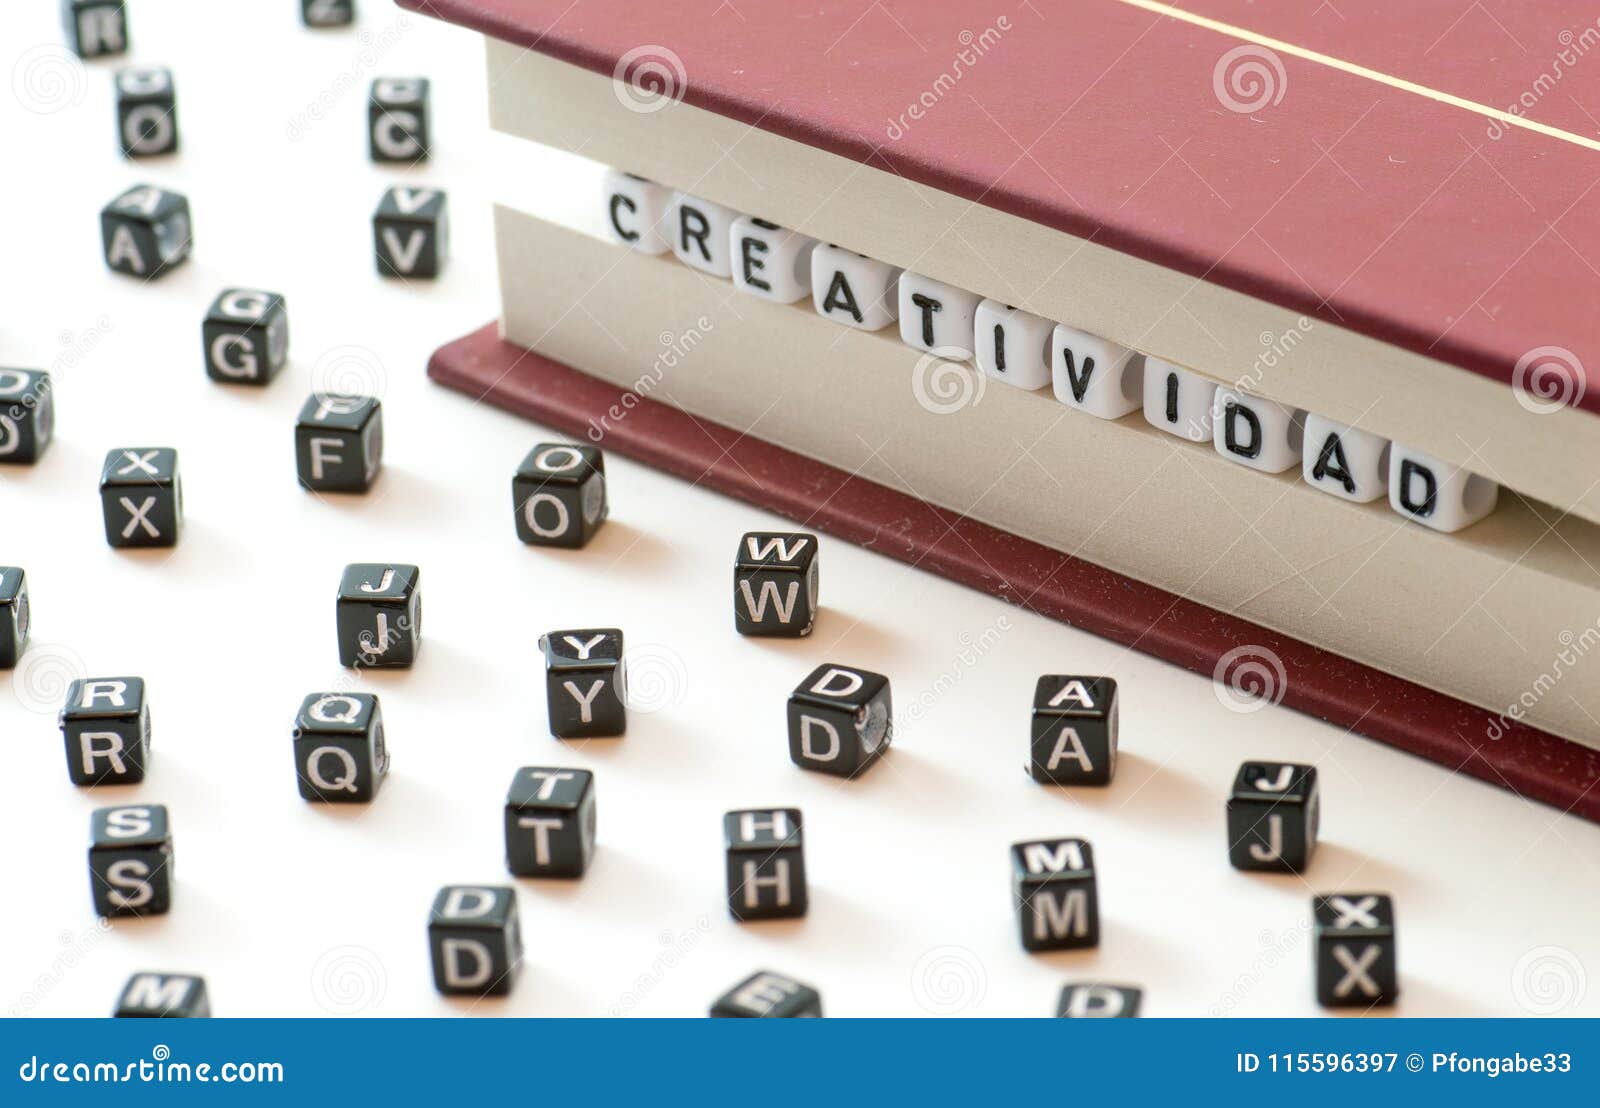 spanish word creatividad meaning creativity written with letters trapped between a book files and spread letters on white backgrou